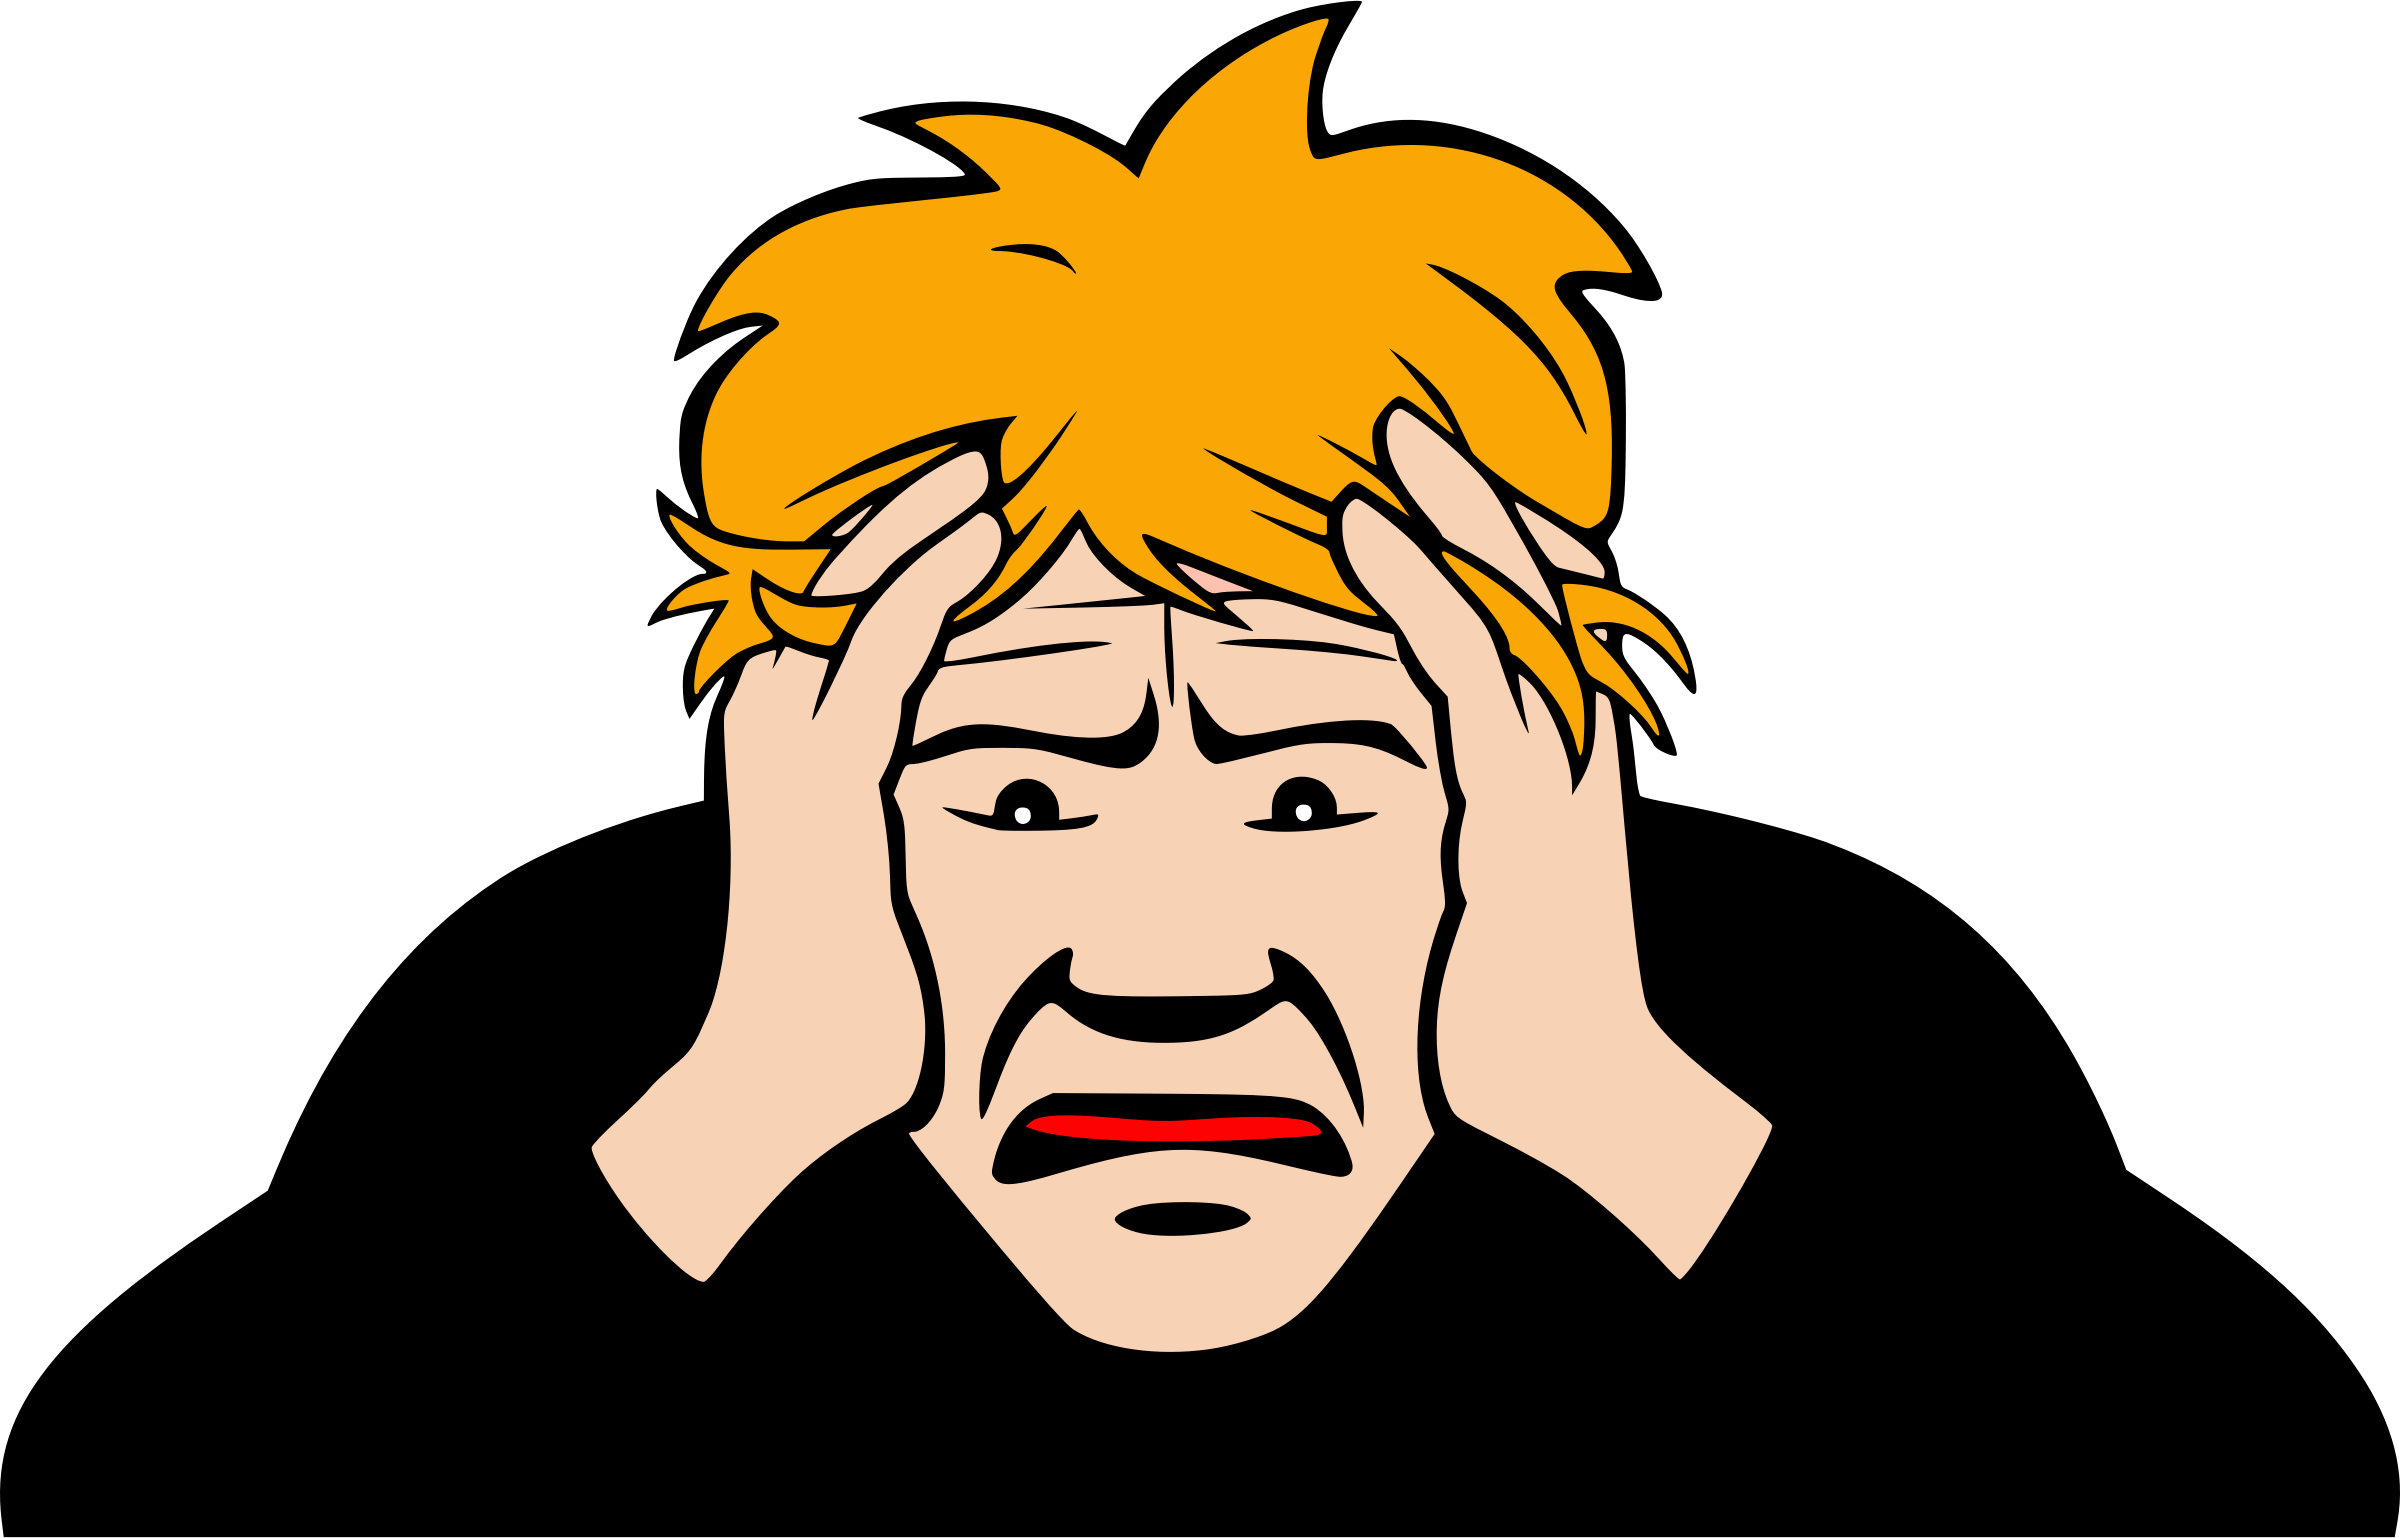 guy clipart worried